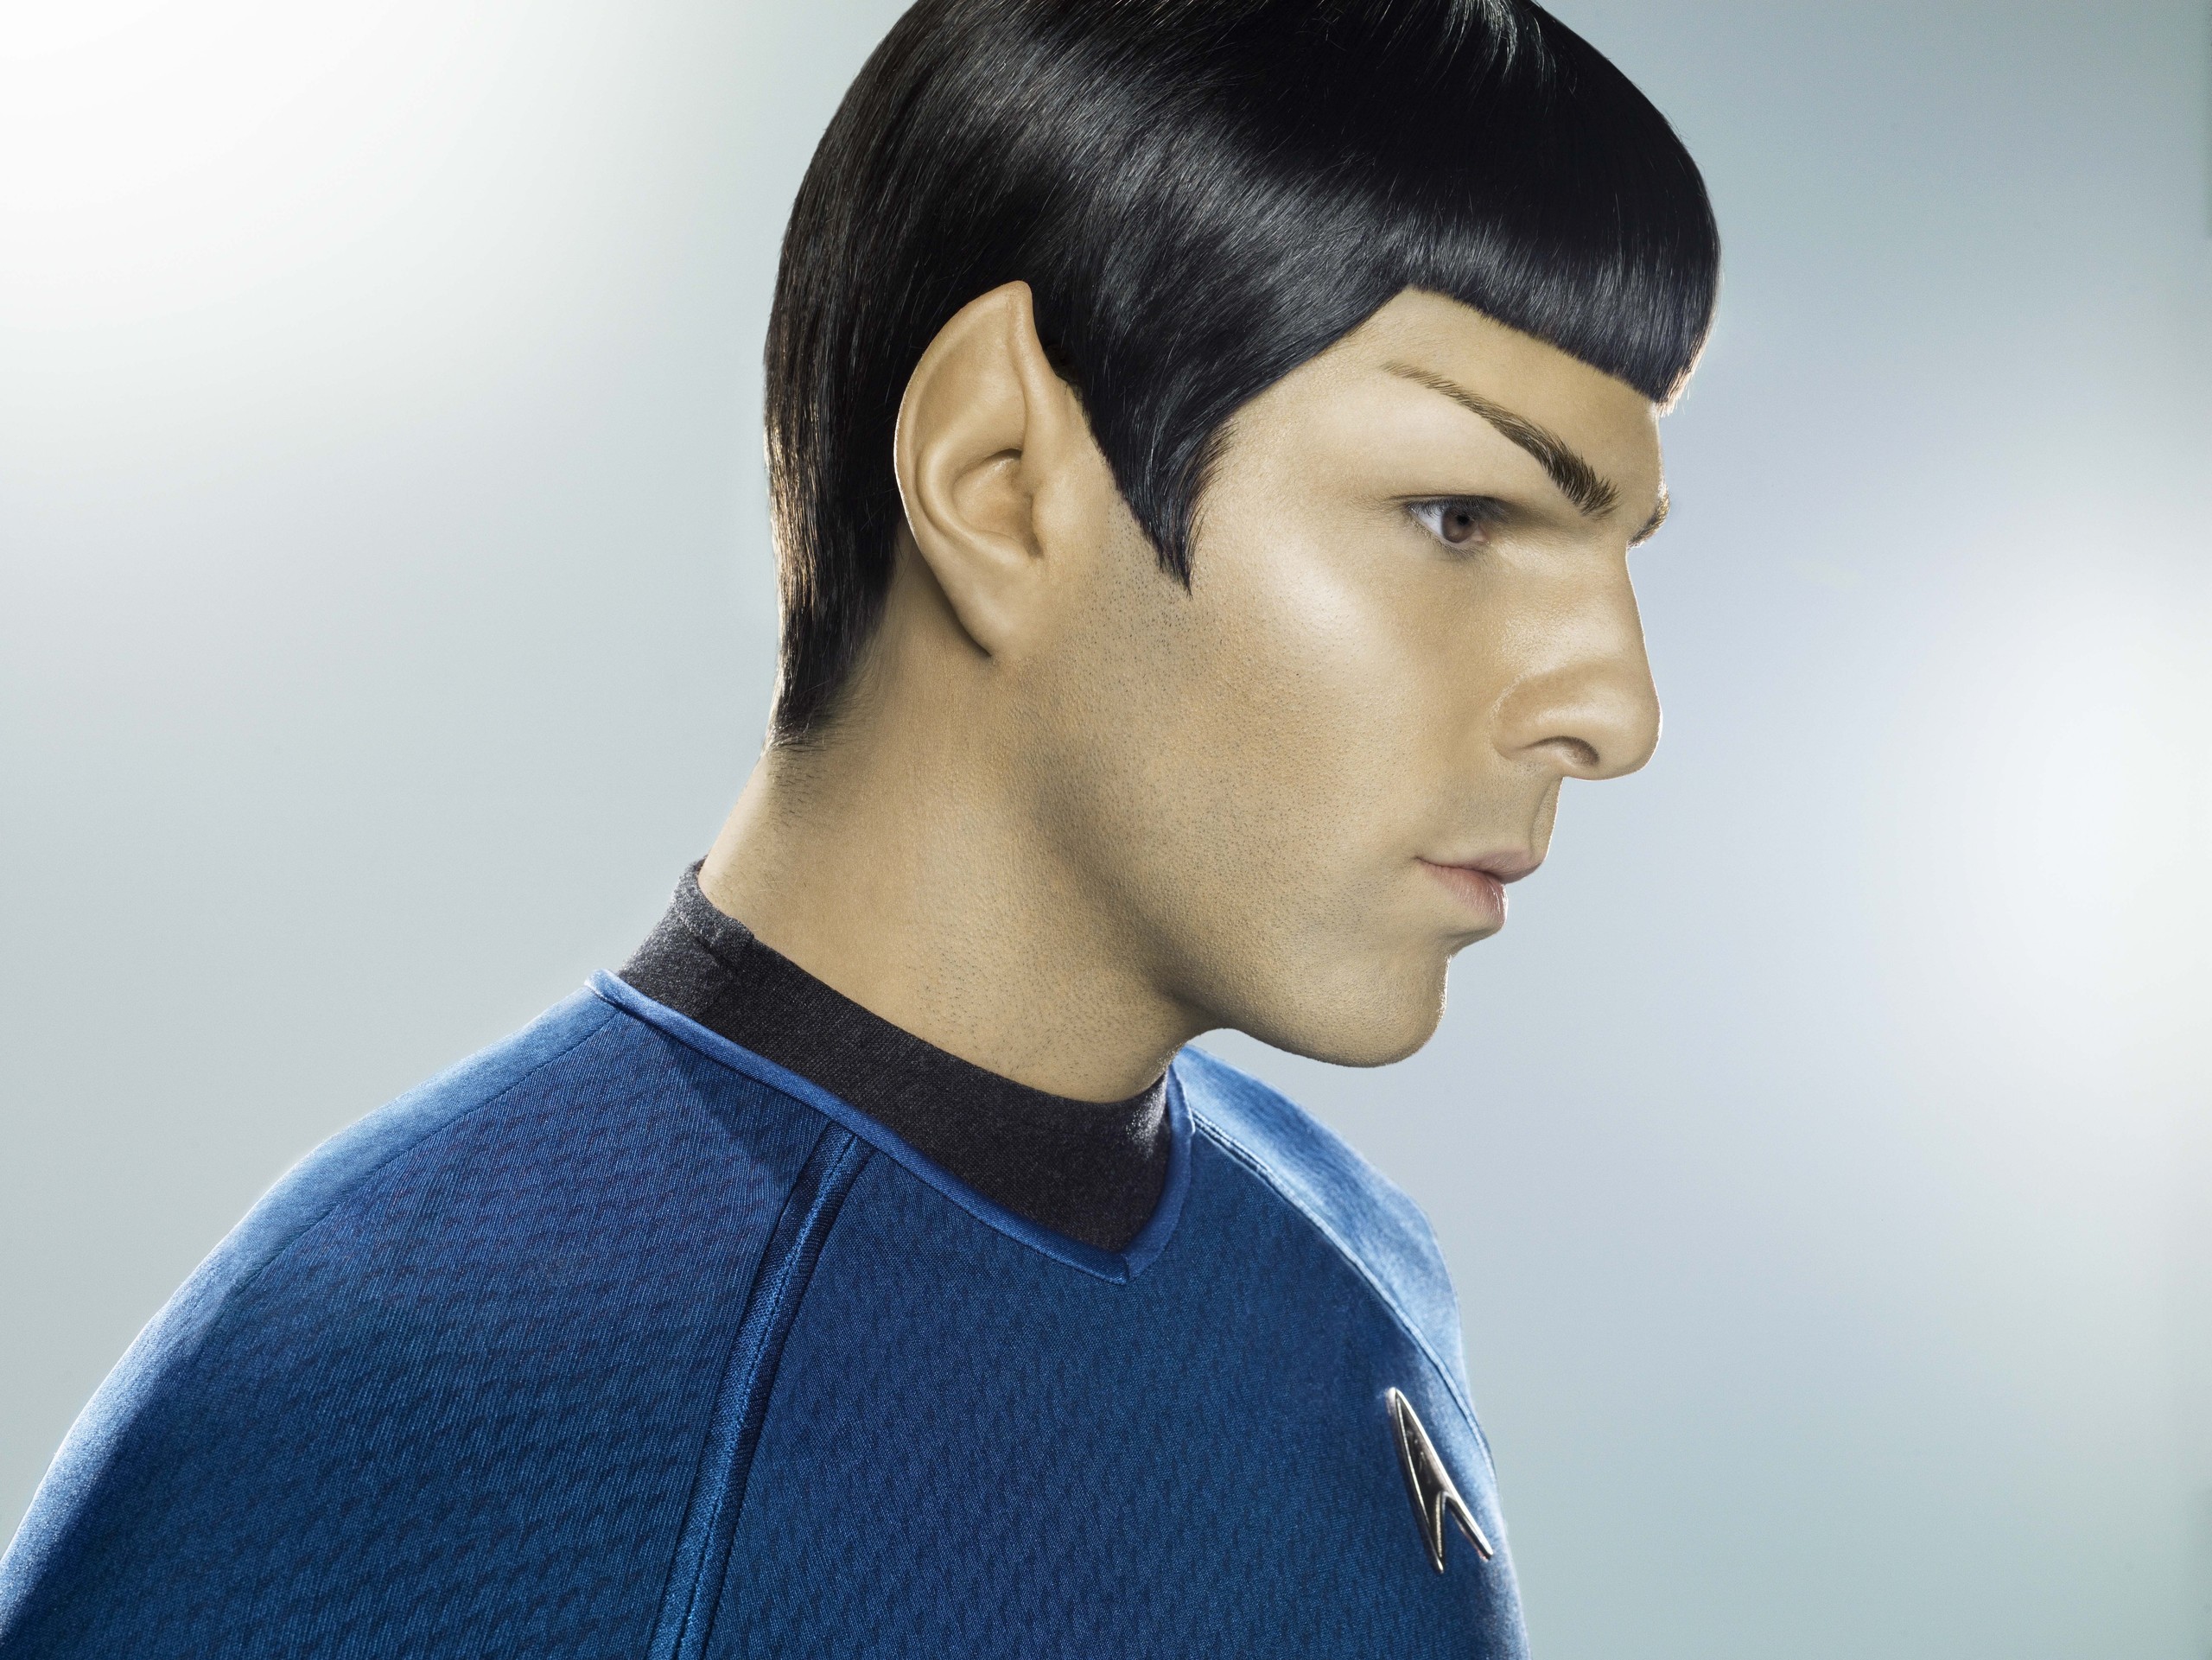 Zachary Quinto Spock Eyebrows - Zachary Quinto Spock , HD Wallpaper & Backgrounds